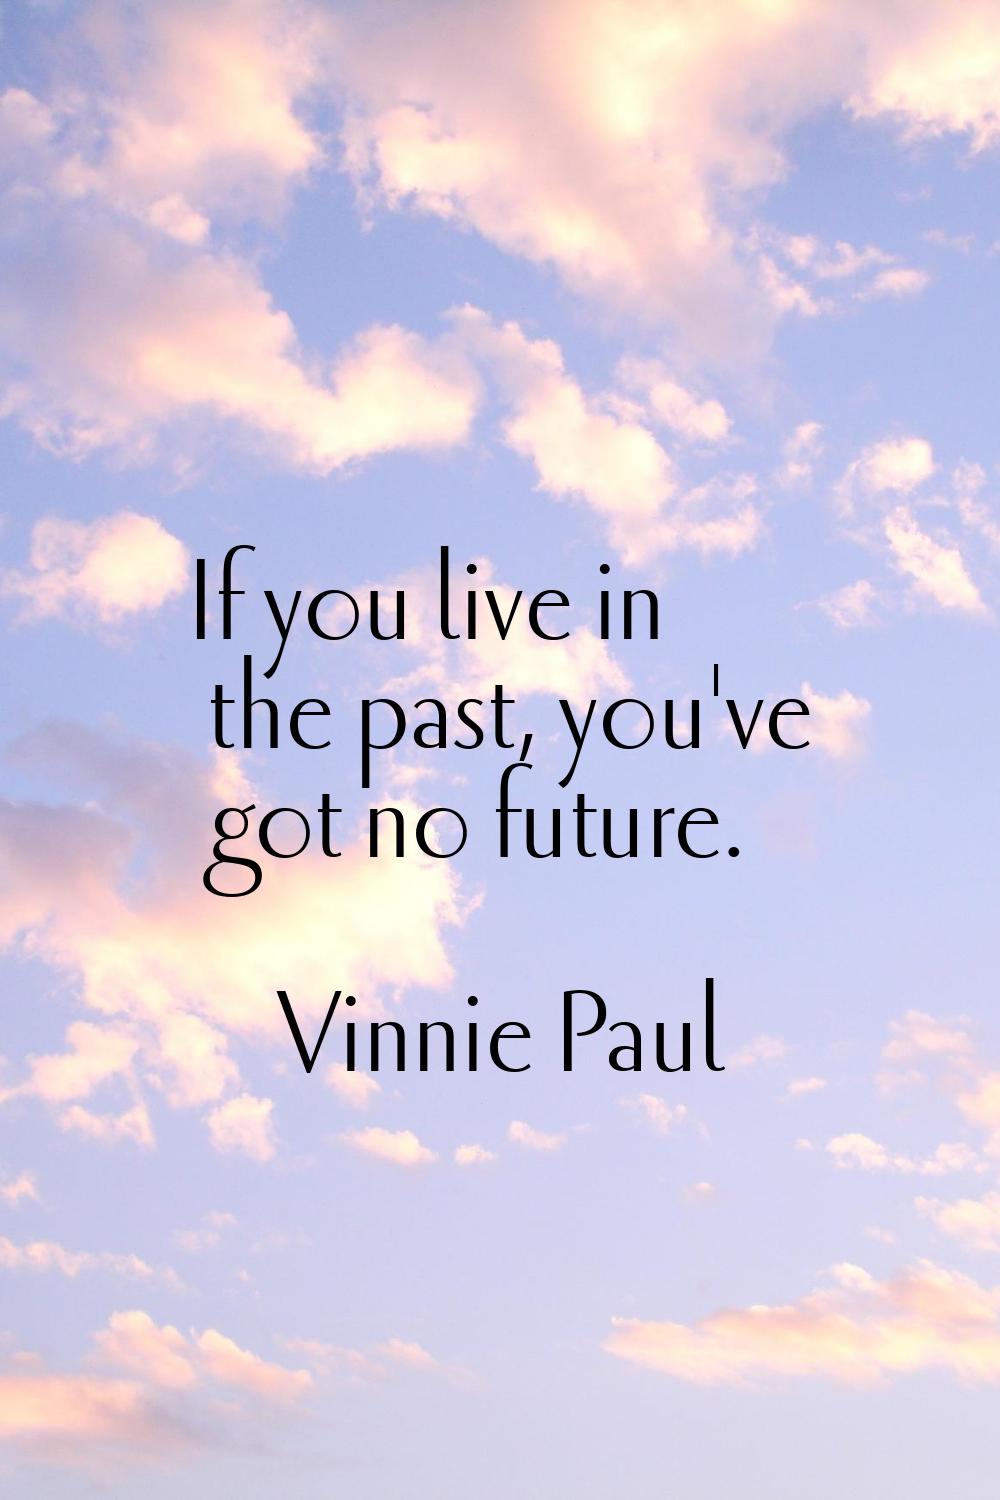 If you live in the past, you've got no future.